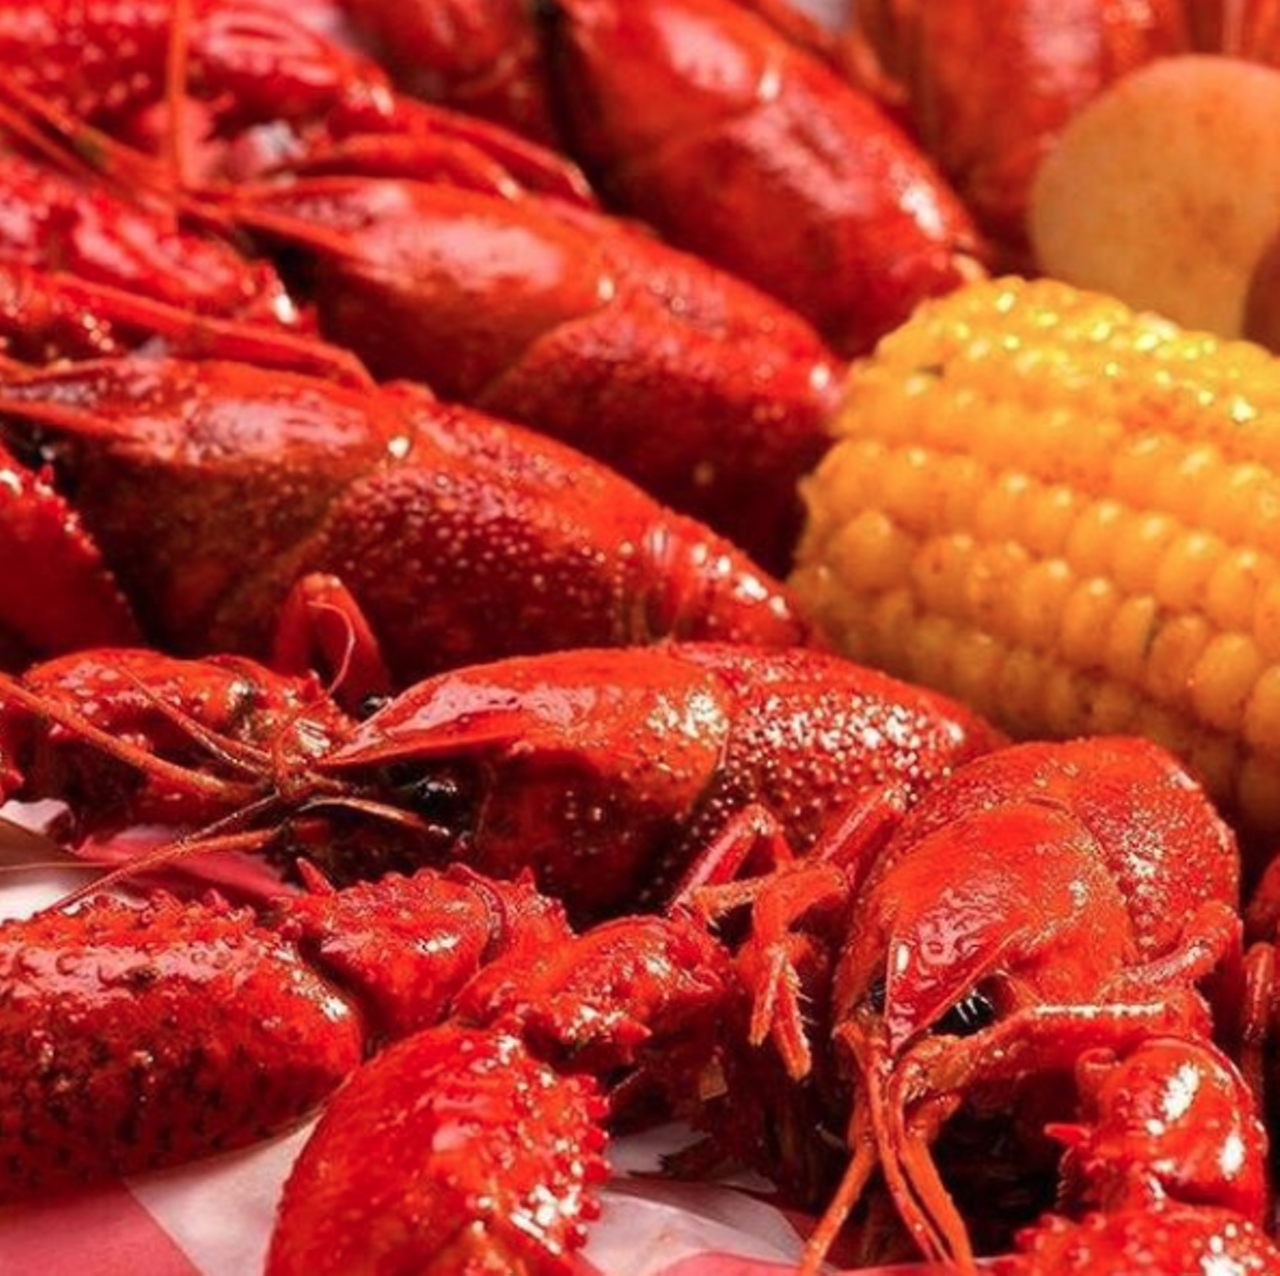 Cajun Crawfish 
5519 W. 1604 N. Suite 102, (210) 233-1030
Cajun Crawfish prepares their meals from scratch to provide the culinary traditions of Asia. If that sounds too stuffy for you, don't fret. It just means the crawfish has a twist and is tasty as can be. If you're brave, take part in the crawfish challenge. It's by the pound!
Photo via cajuncrawfishsa / Instagram